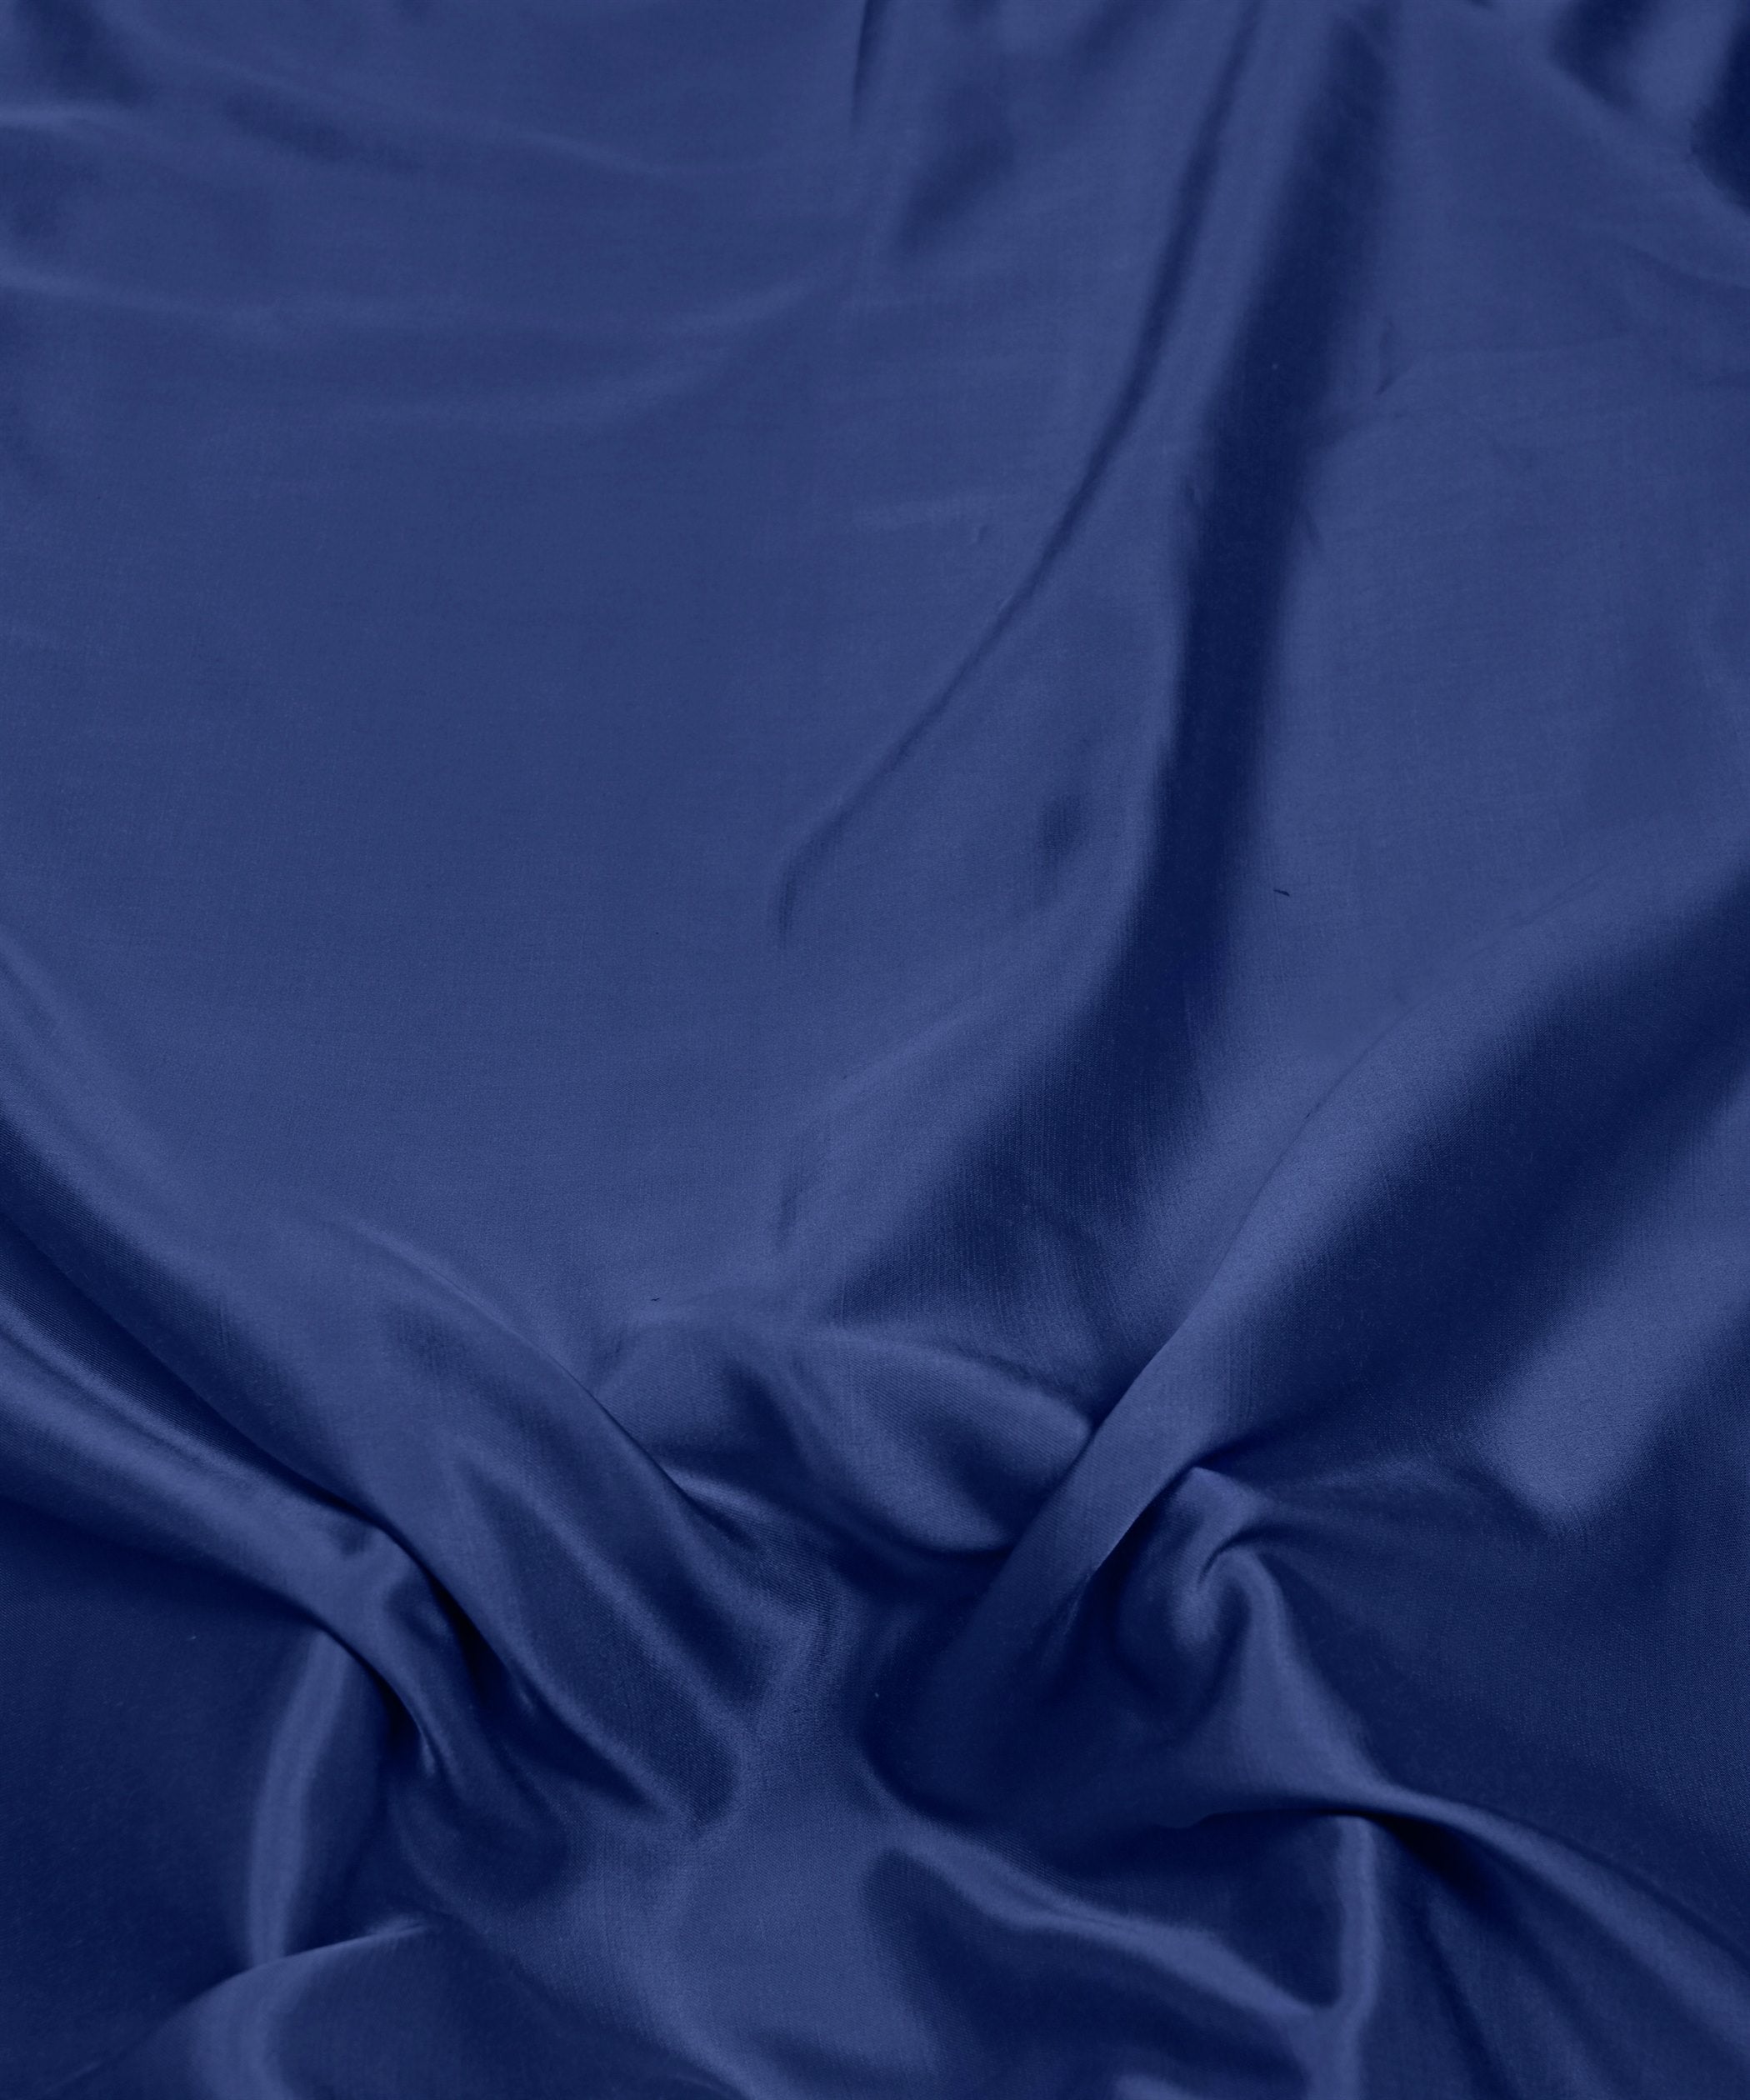 Buy Glossy Blue Plain Modal Satin Fabric Online At Wholesale Prices – Fabric  Depot